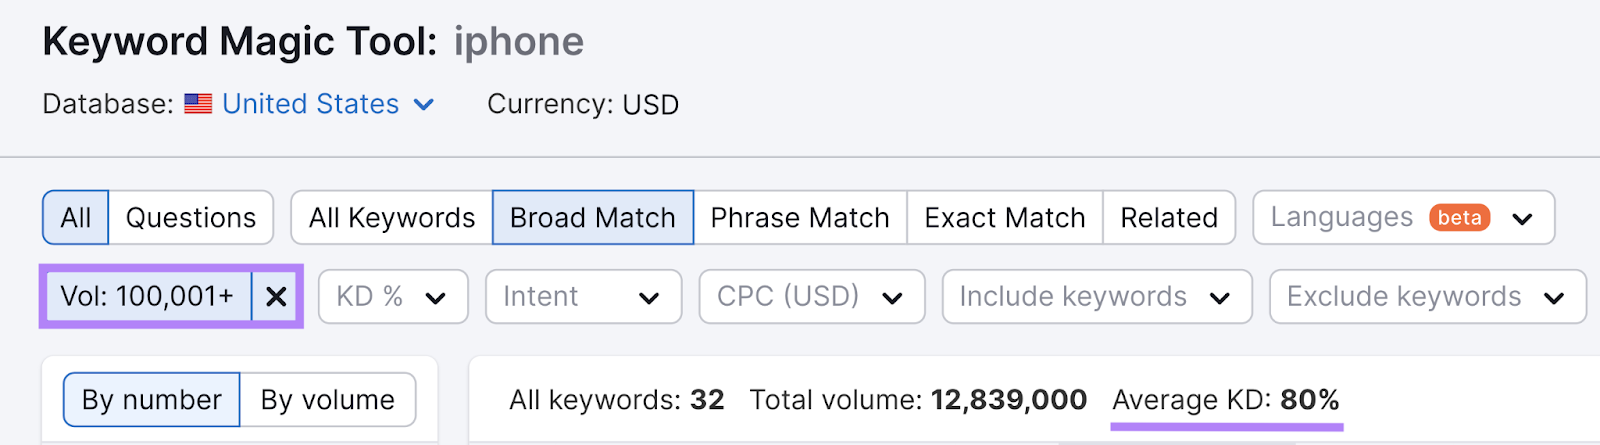 100,001+ search volume has an average keyword difficulty of 80%